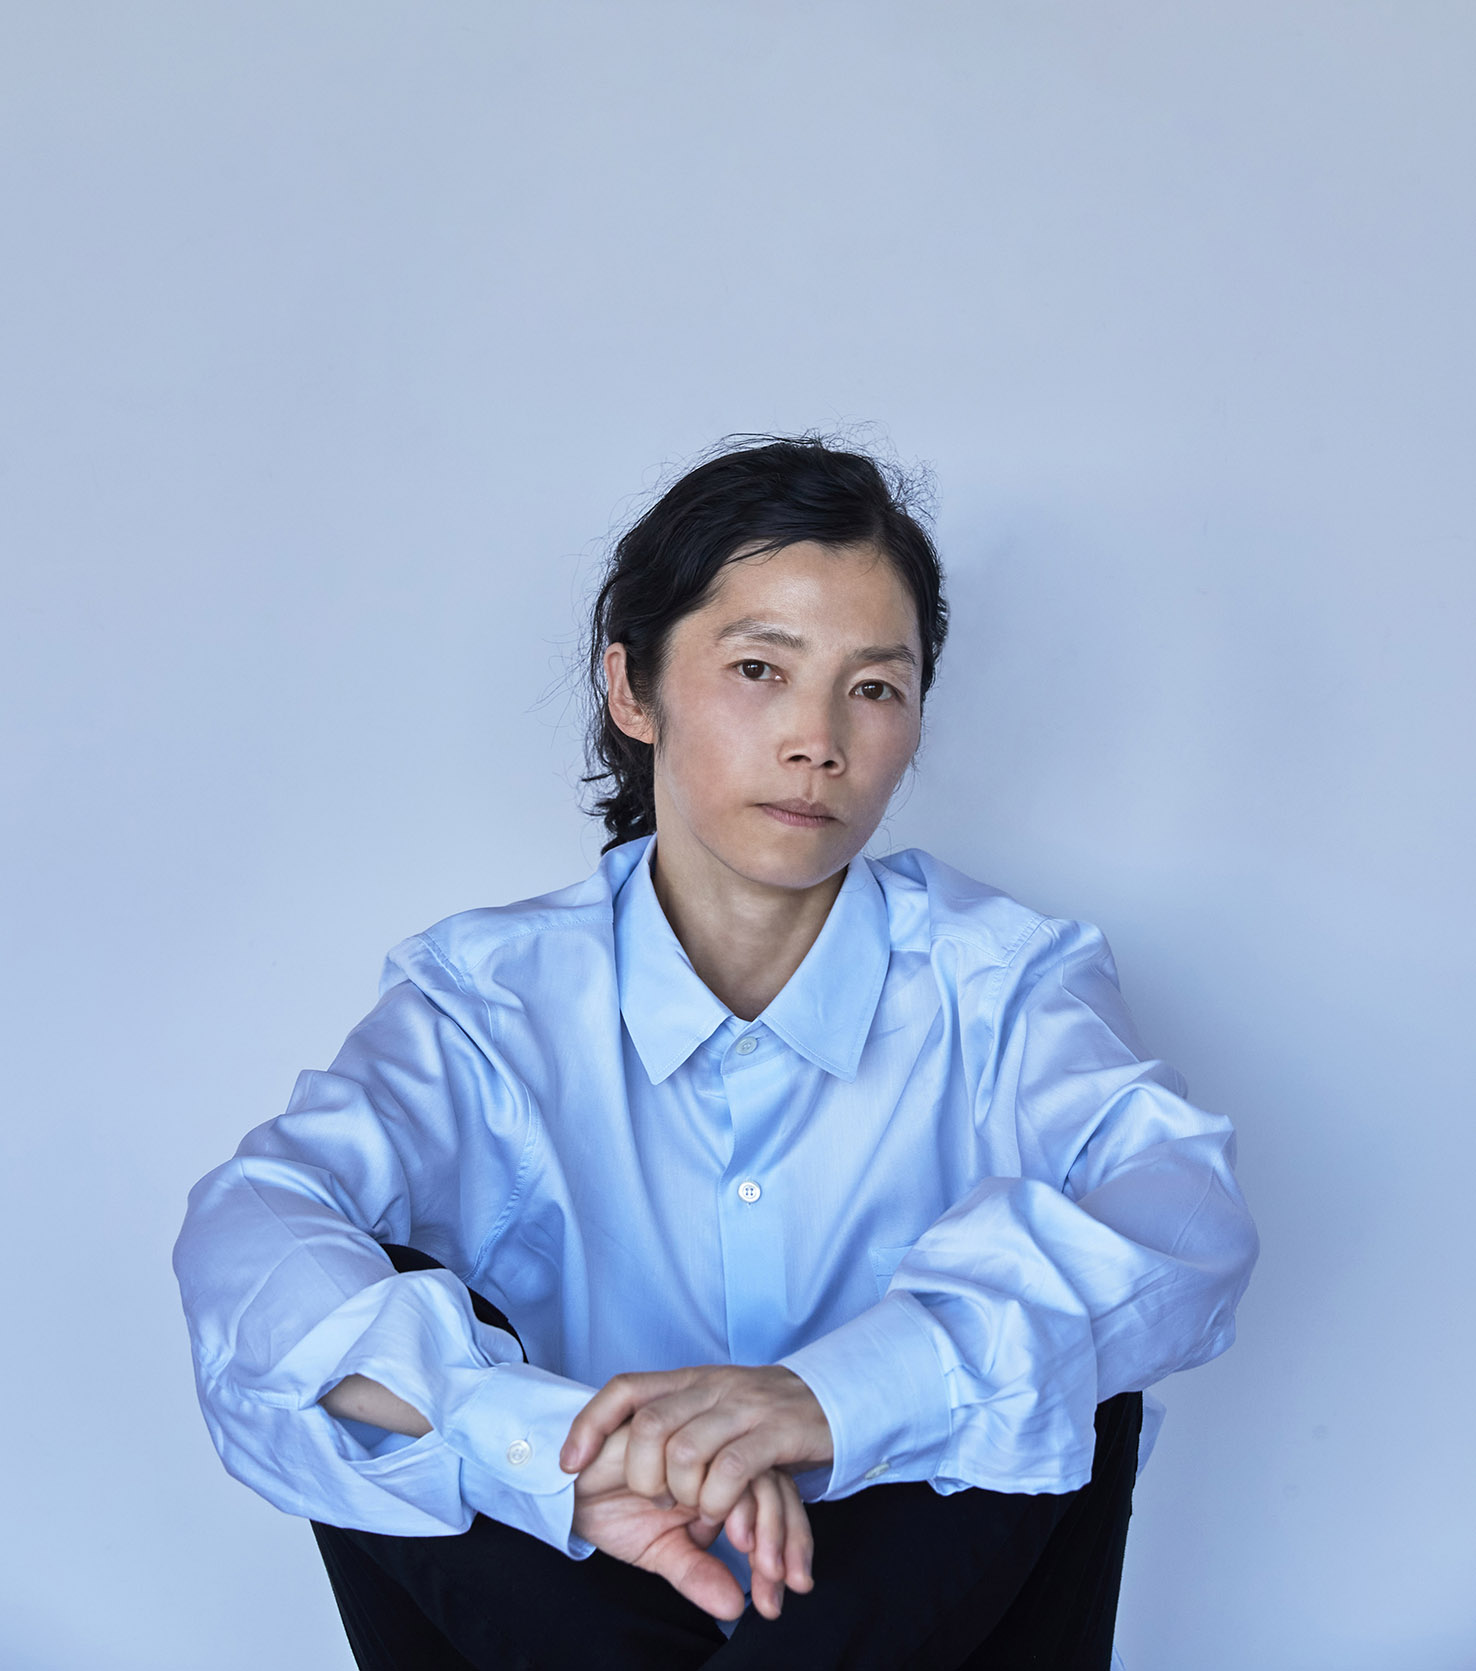 The artist Koo Jeong A sits in front of a light blue wall in a light blue shirt.